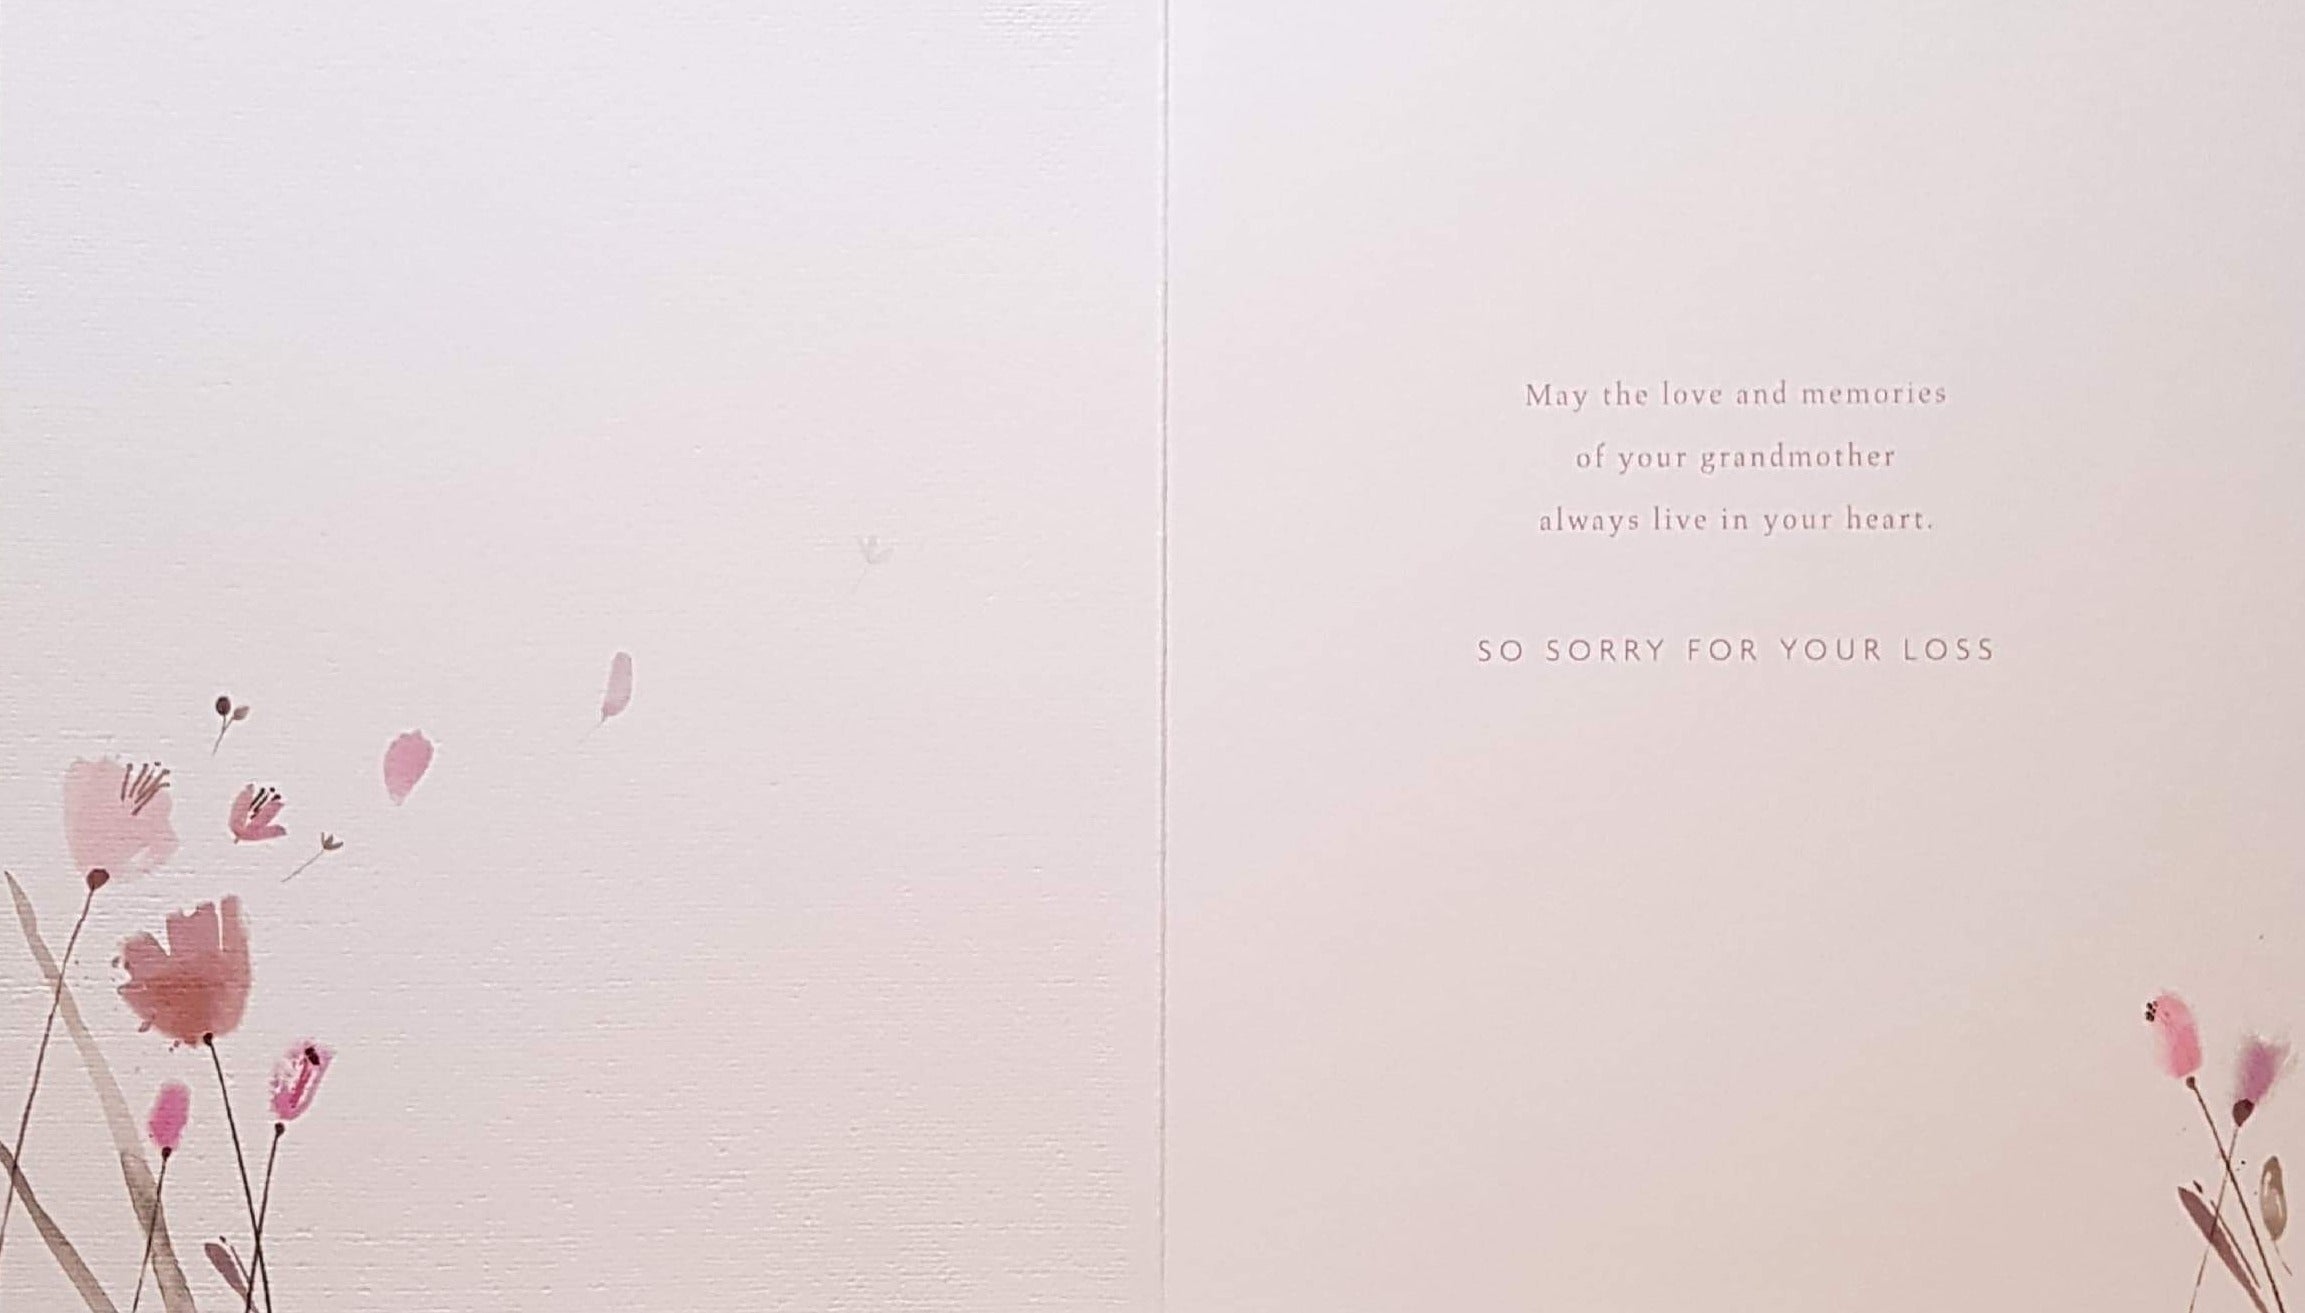 Sympathy Card - 'Sorry To Hear About Your Grandma'